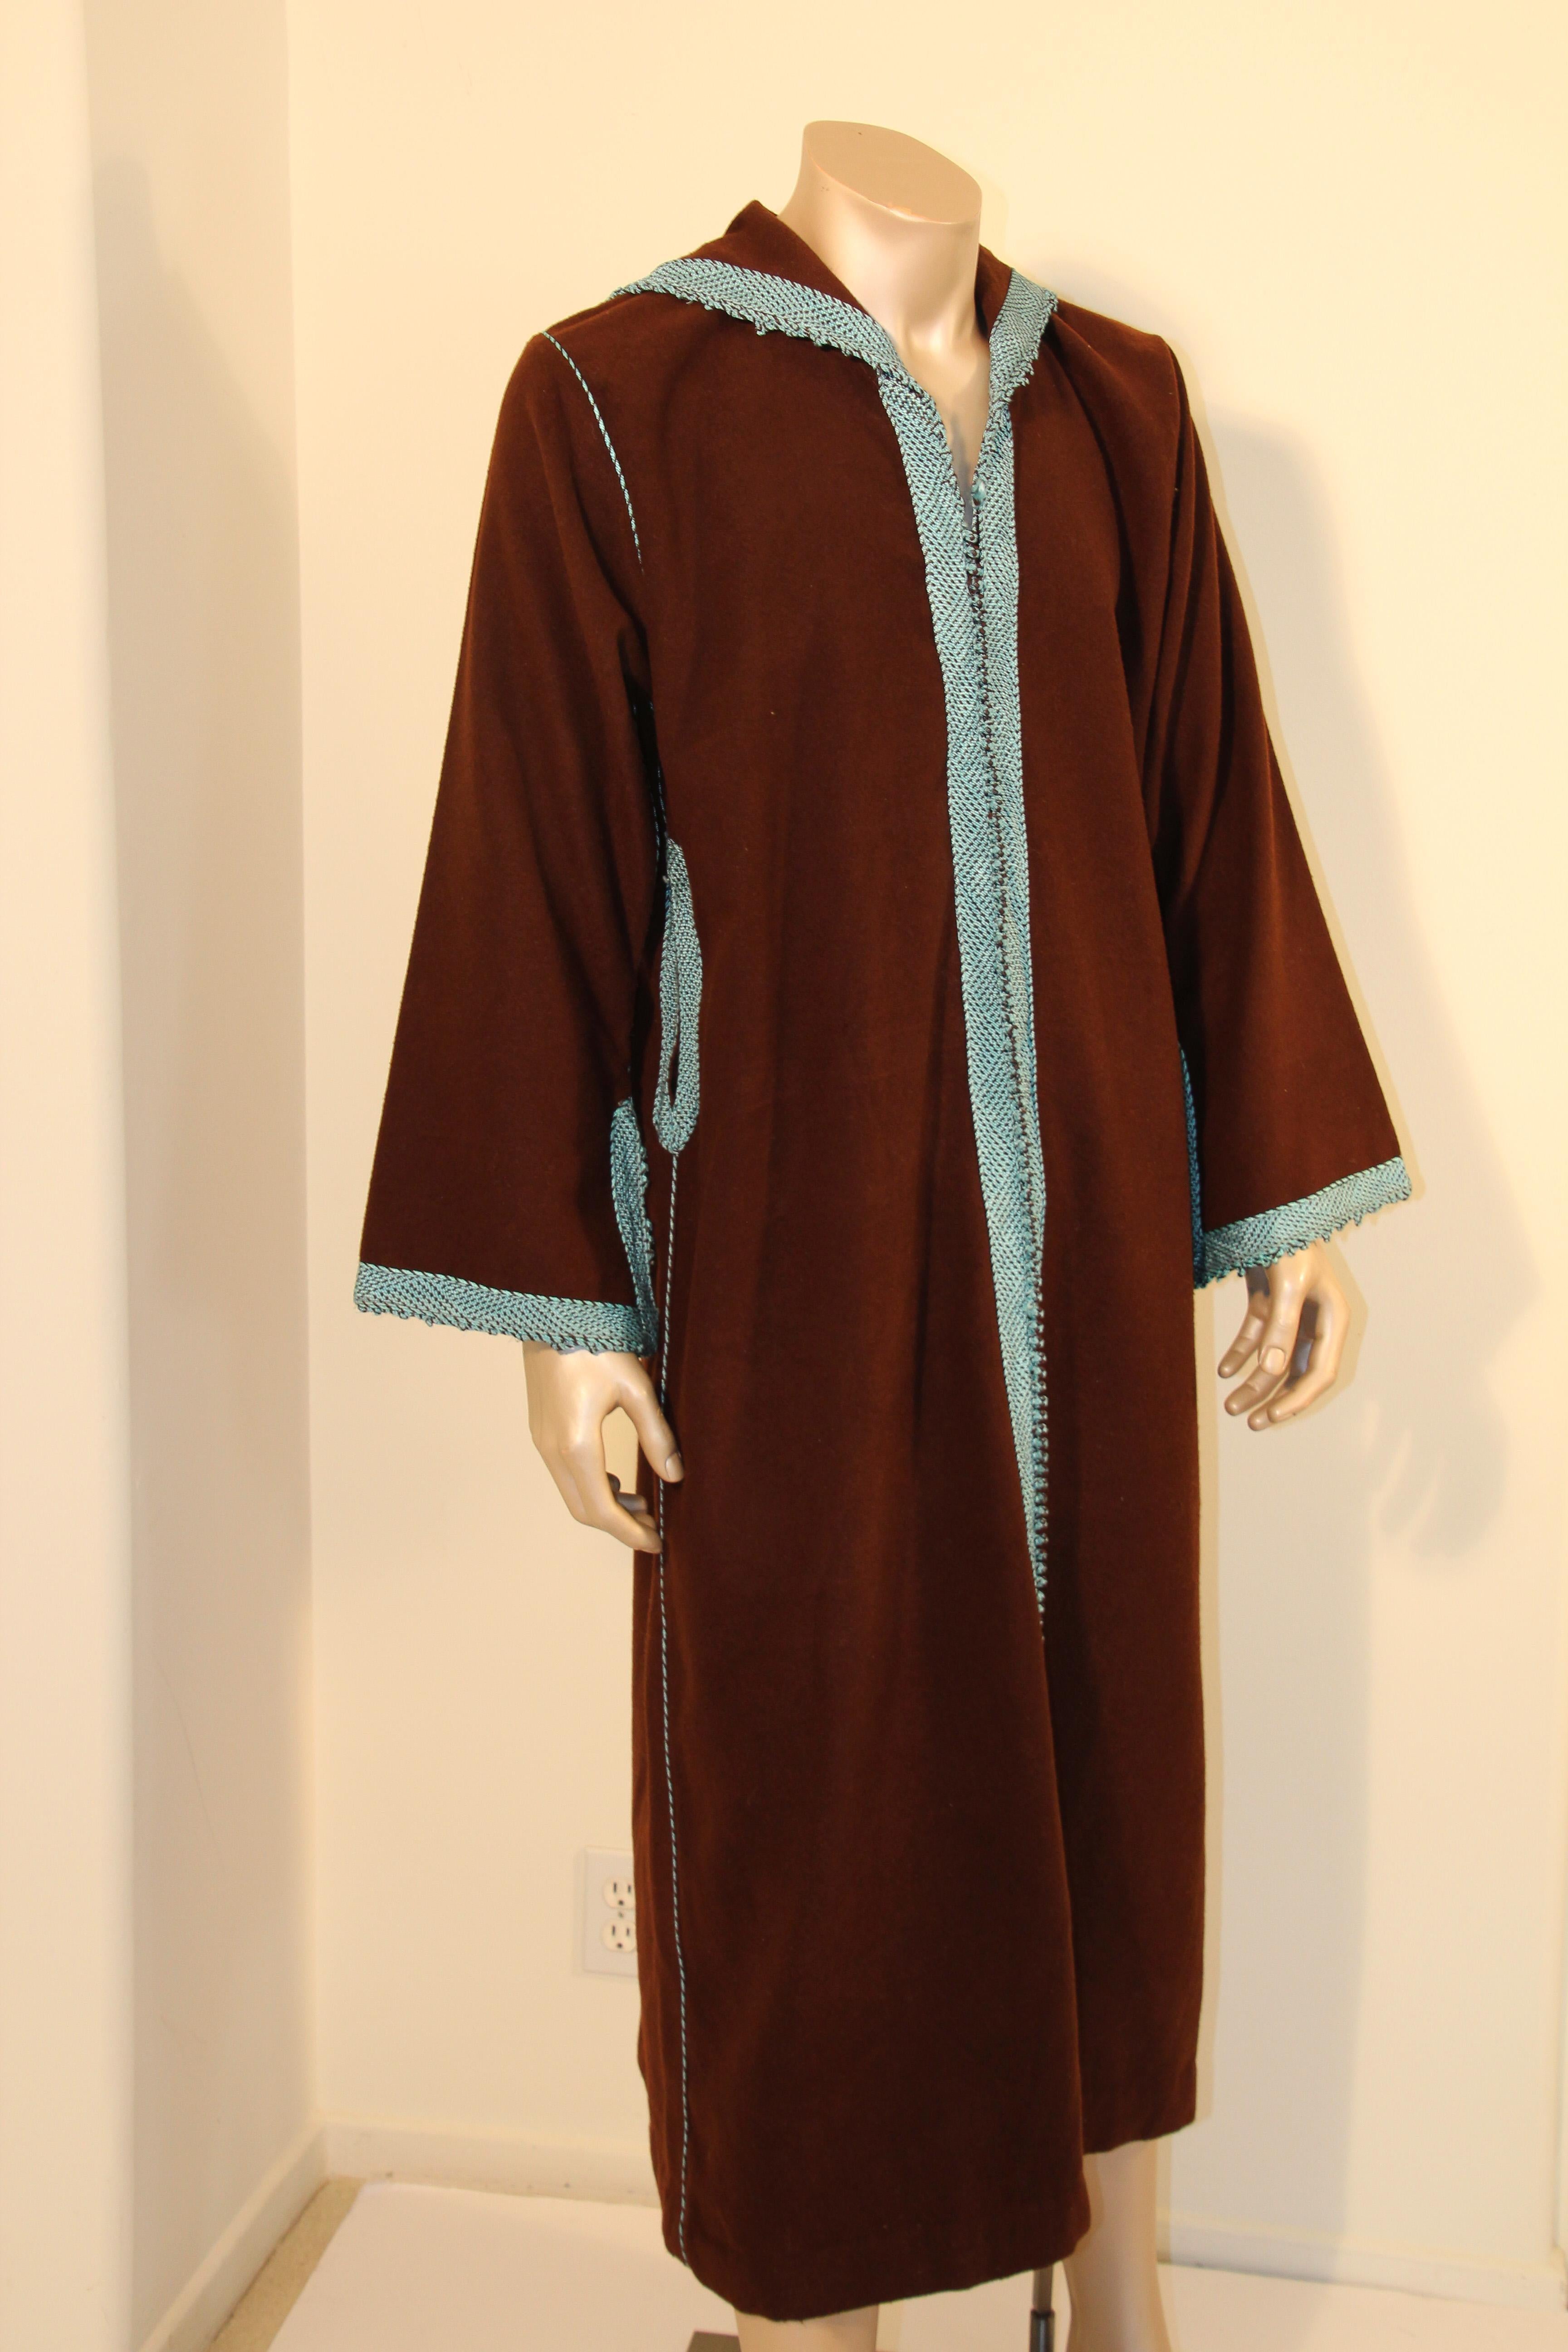 Green Cashmere Brown and Turquoise Caftan 1980s Robe For Sale